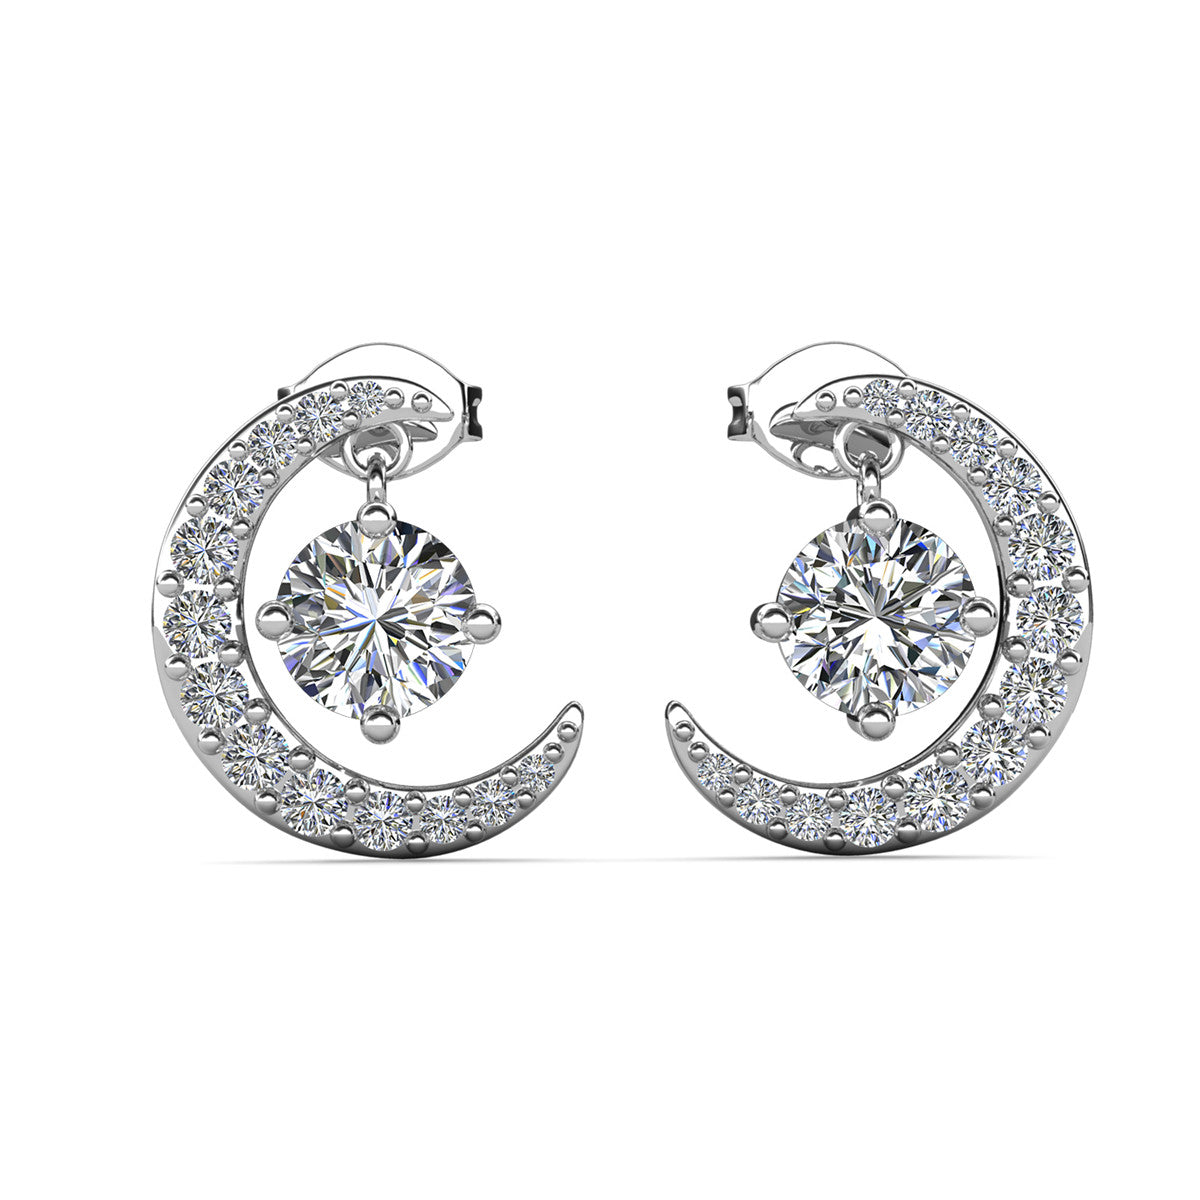 Luna Birthstone Stud Earrings 18k White Gold Plated with Round Cut Crystals